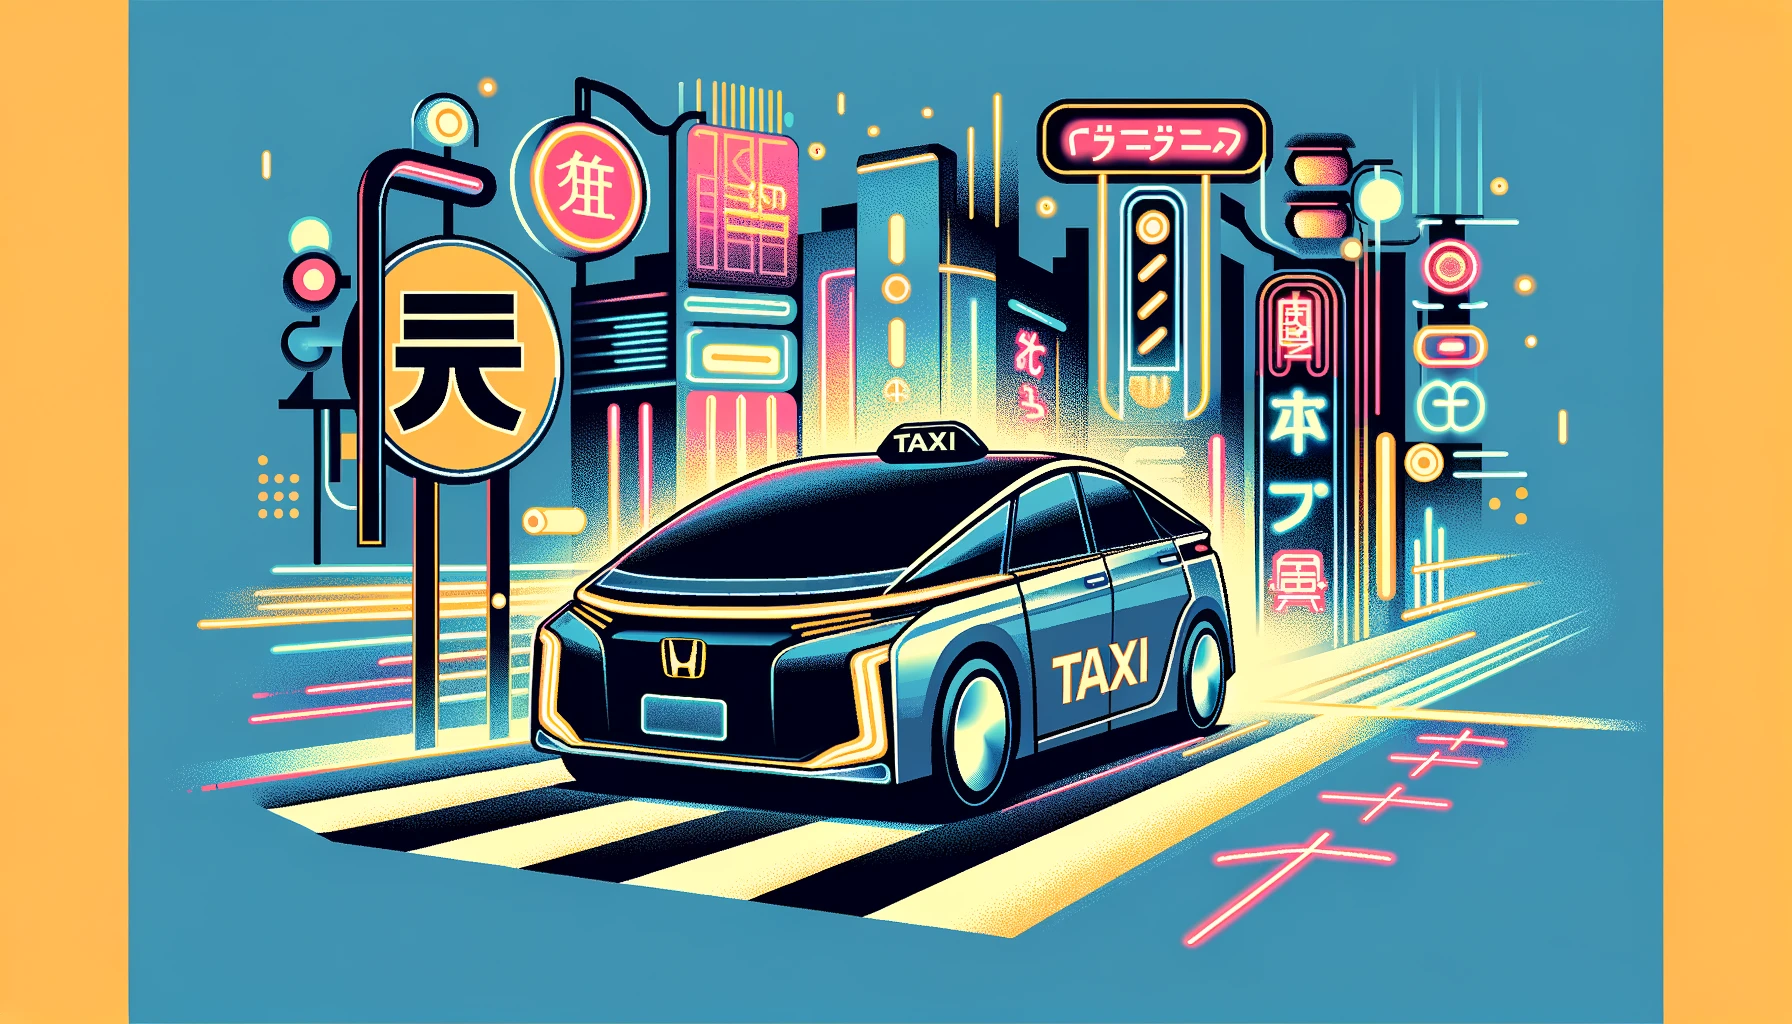 Honda collaborates with Japanese taxi firms to launch autonomous driving service